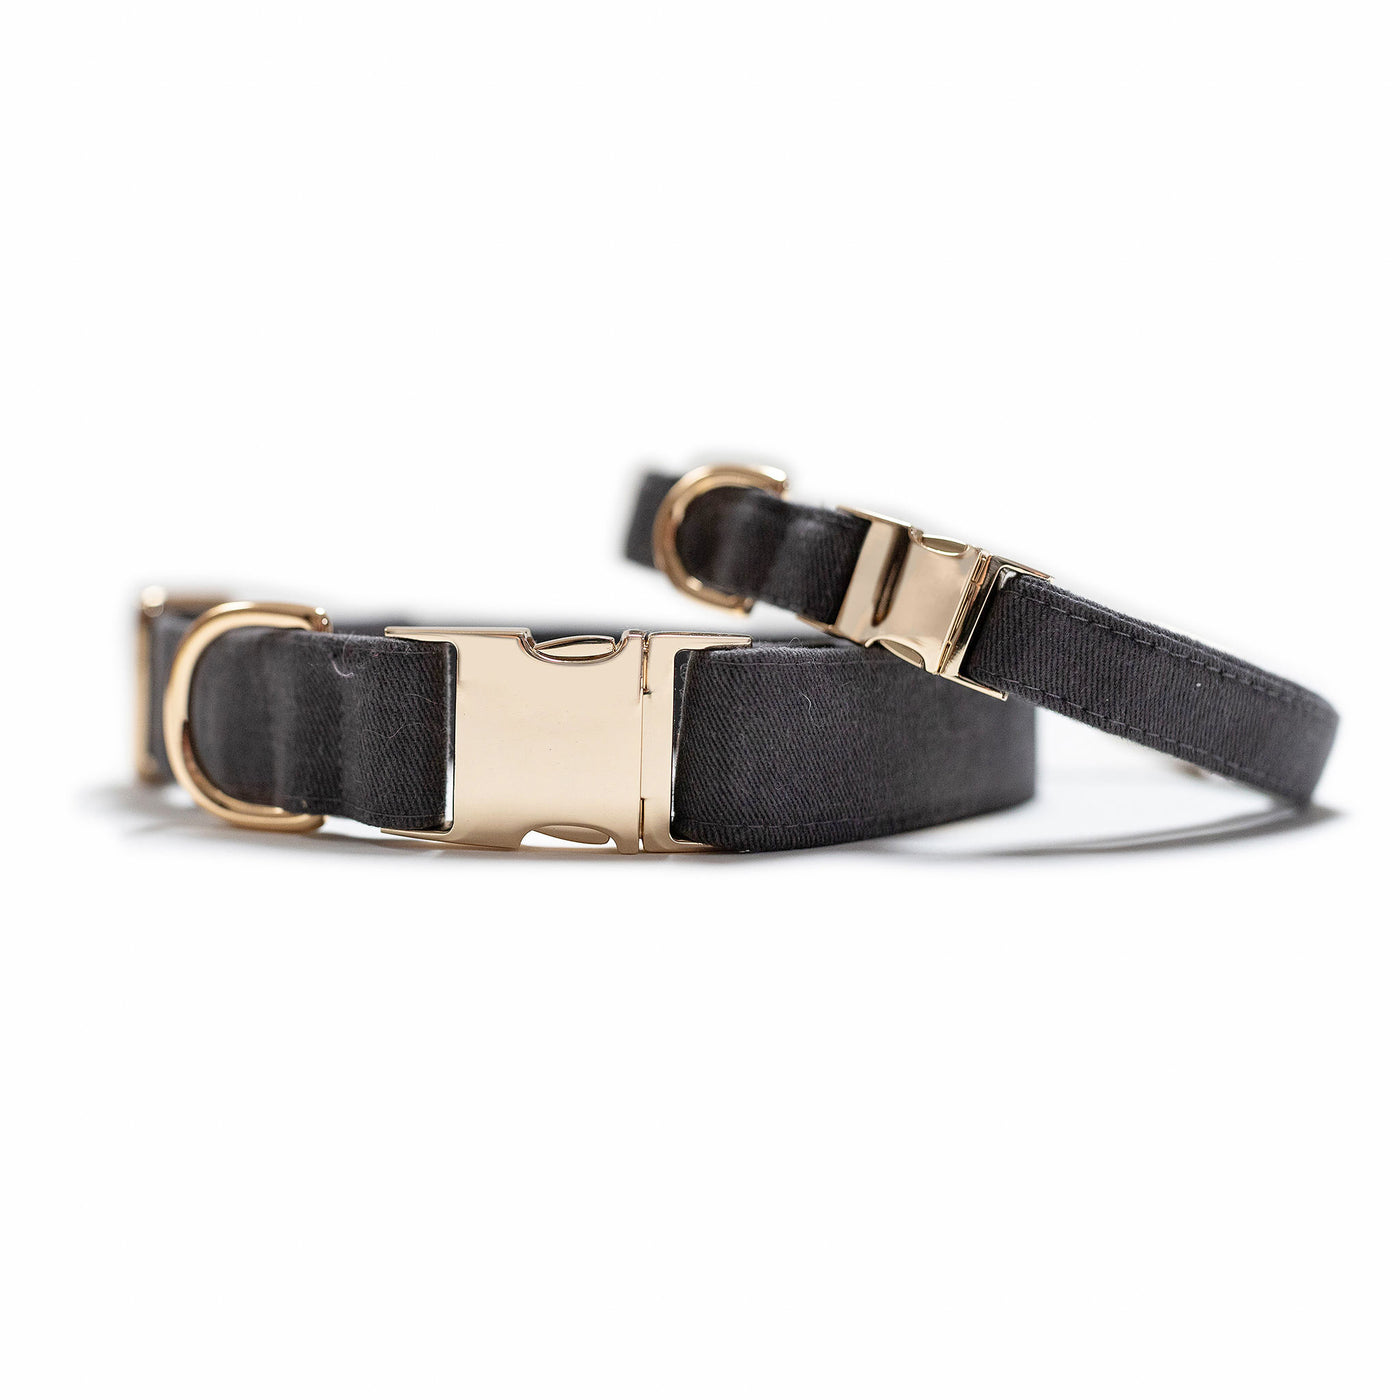 Two stacked dog collars with gold hardware in dark gray